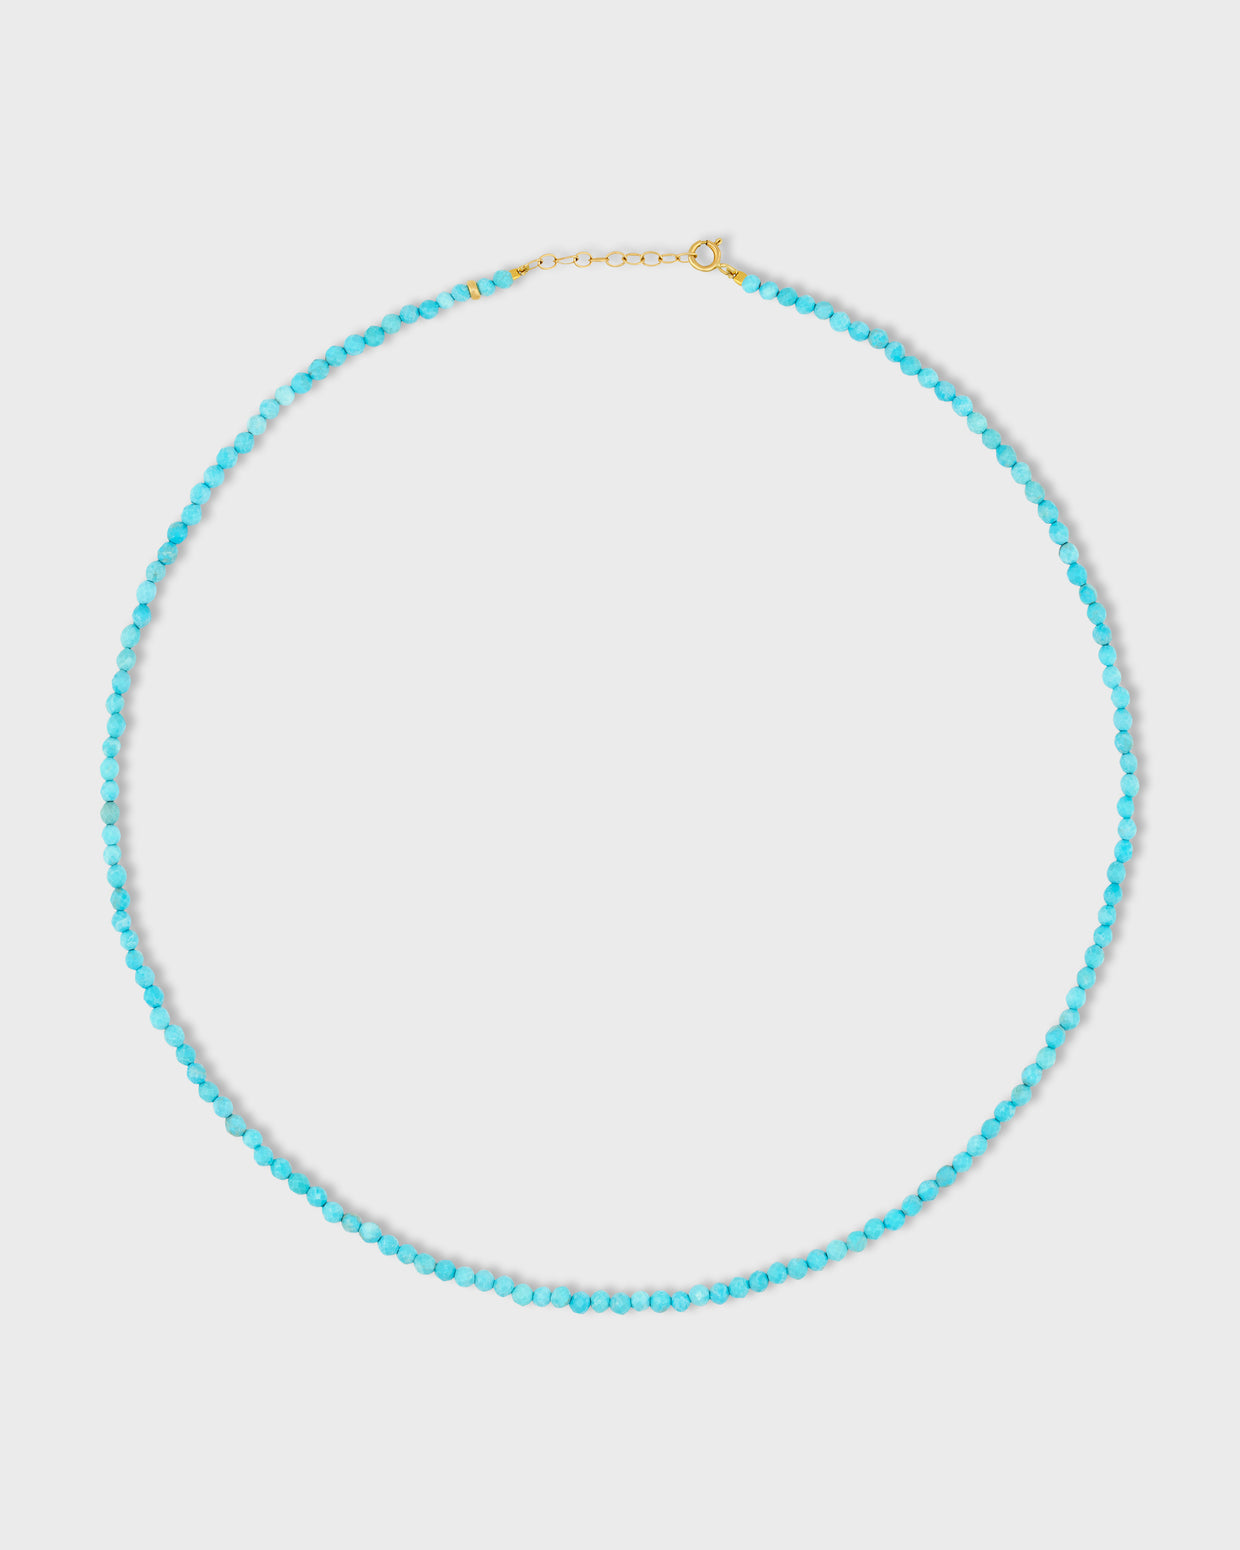 Birthstone December Turquoise Beaded Necklace